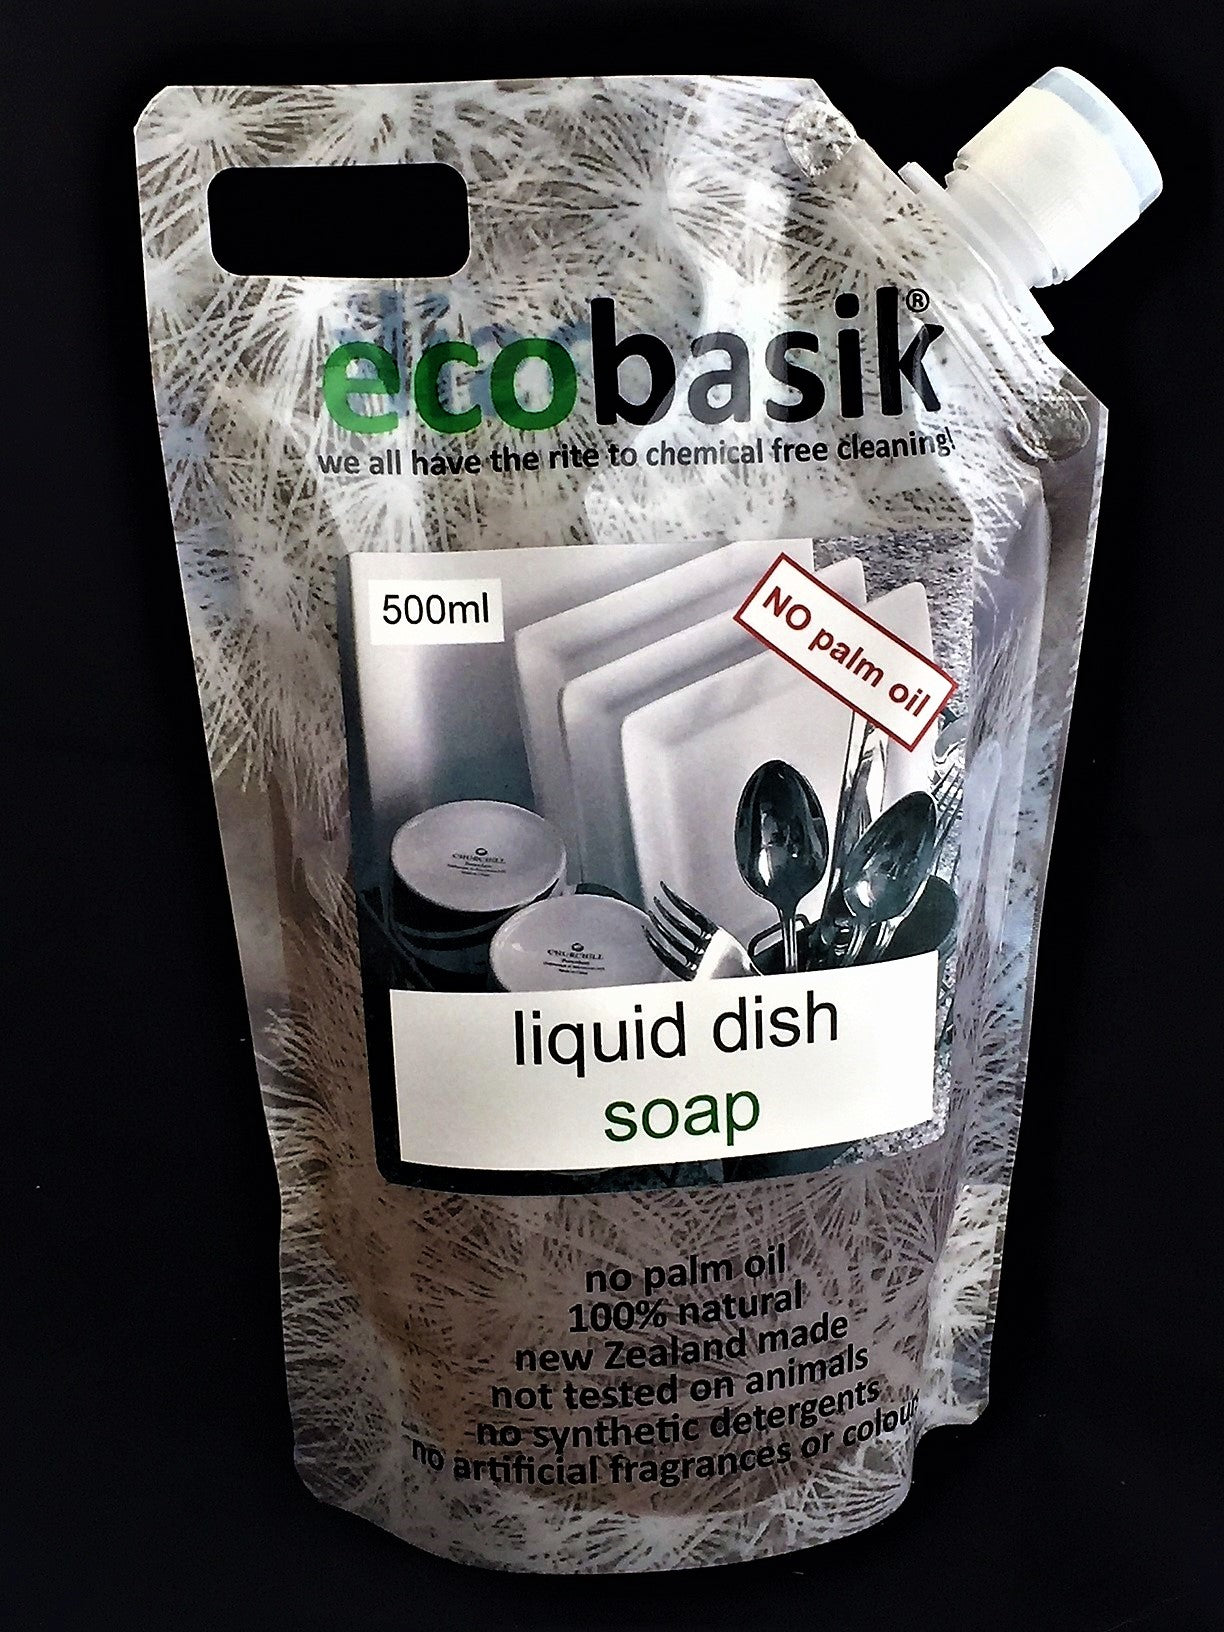 ecobasik - liquid dish soap - SAFE cleaning for the home!